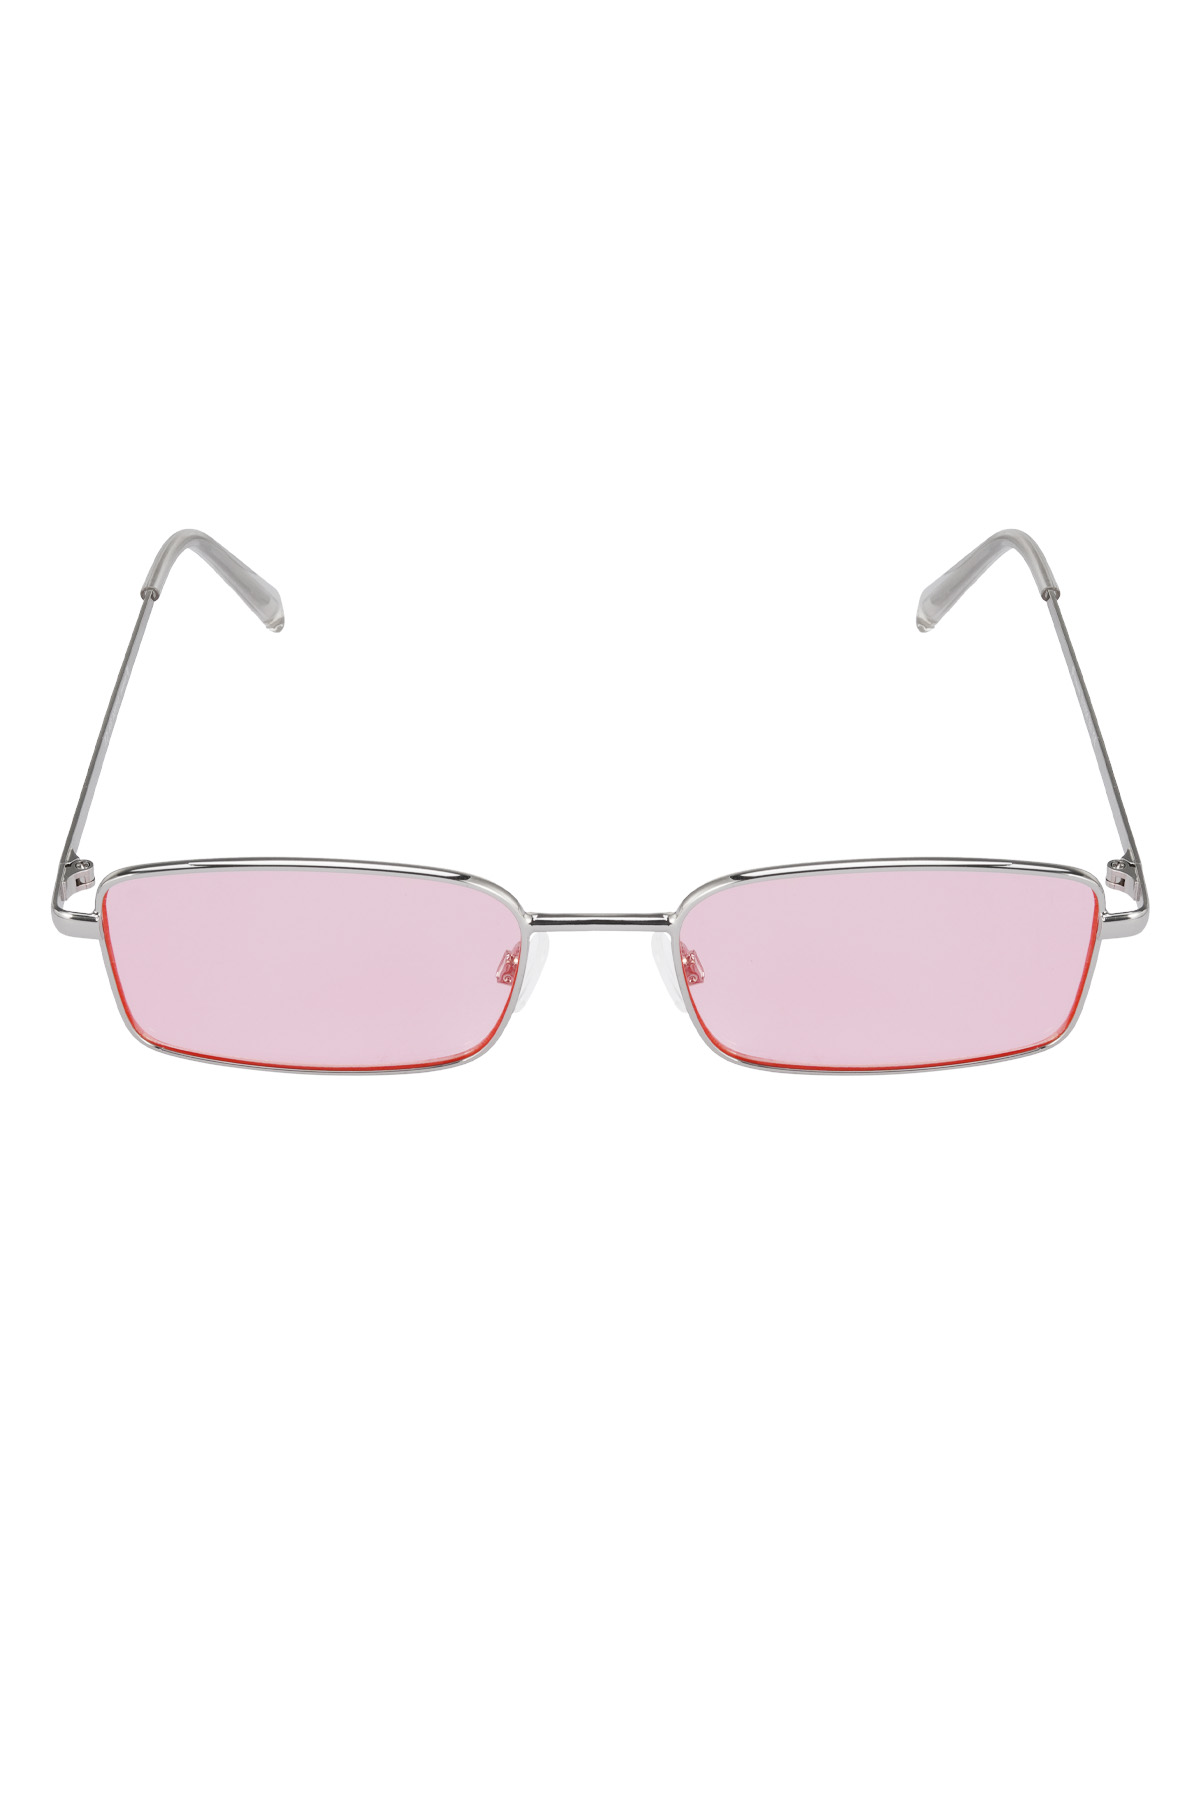 Sunglasses radiant view - pink gold h5 Picture4